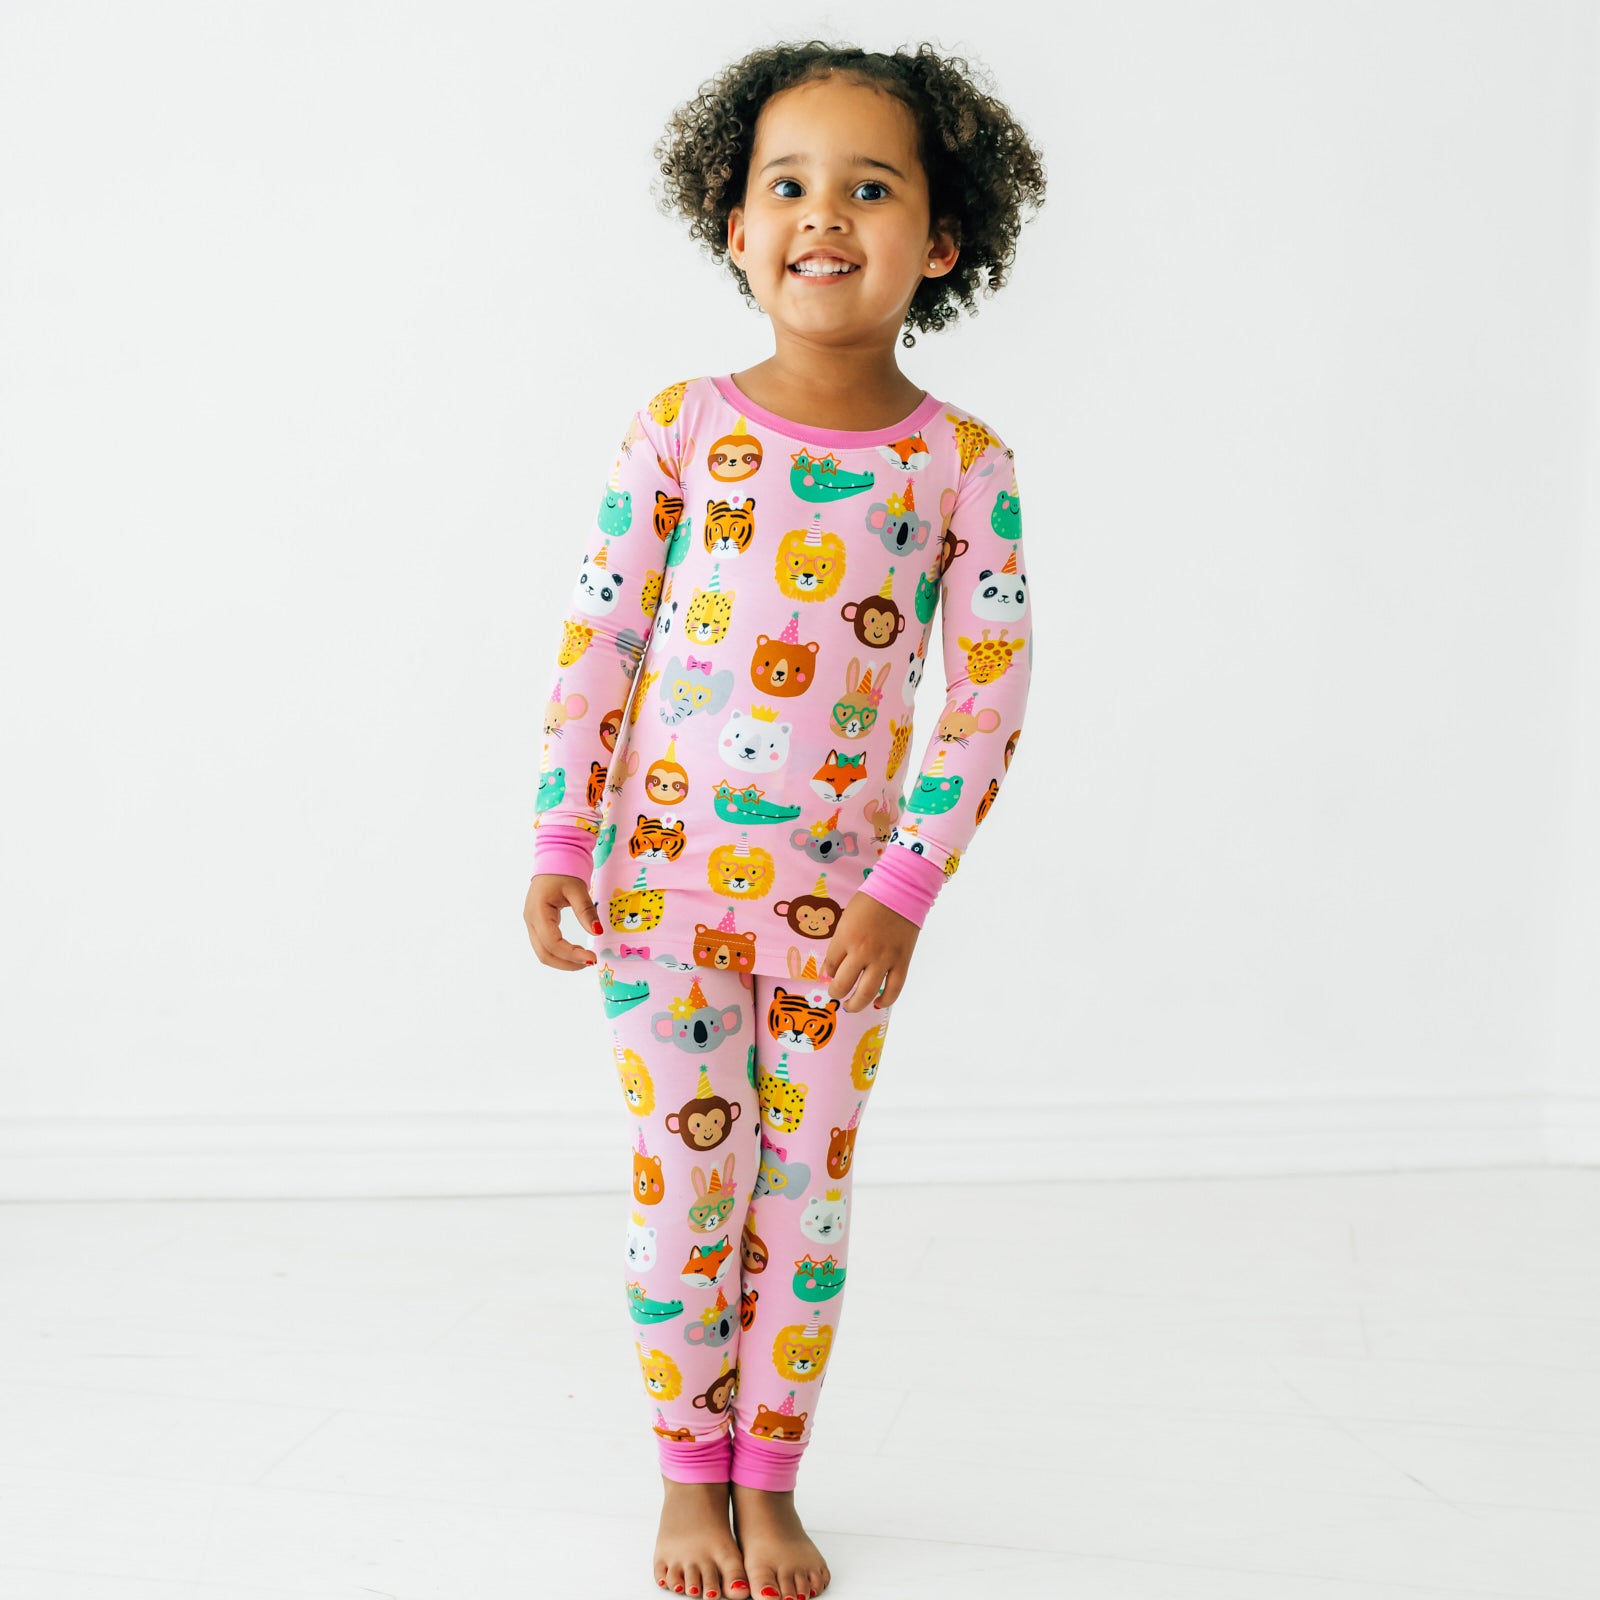 Alternate image of a child wearing a Pink Party Pals two piece pj set